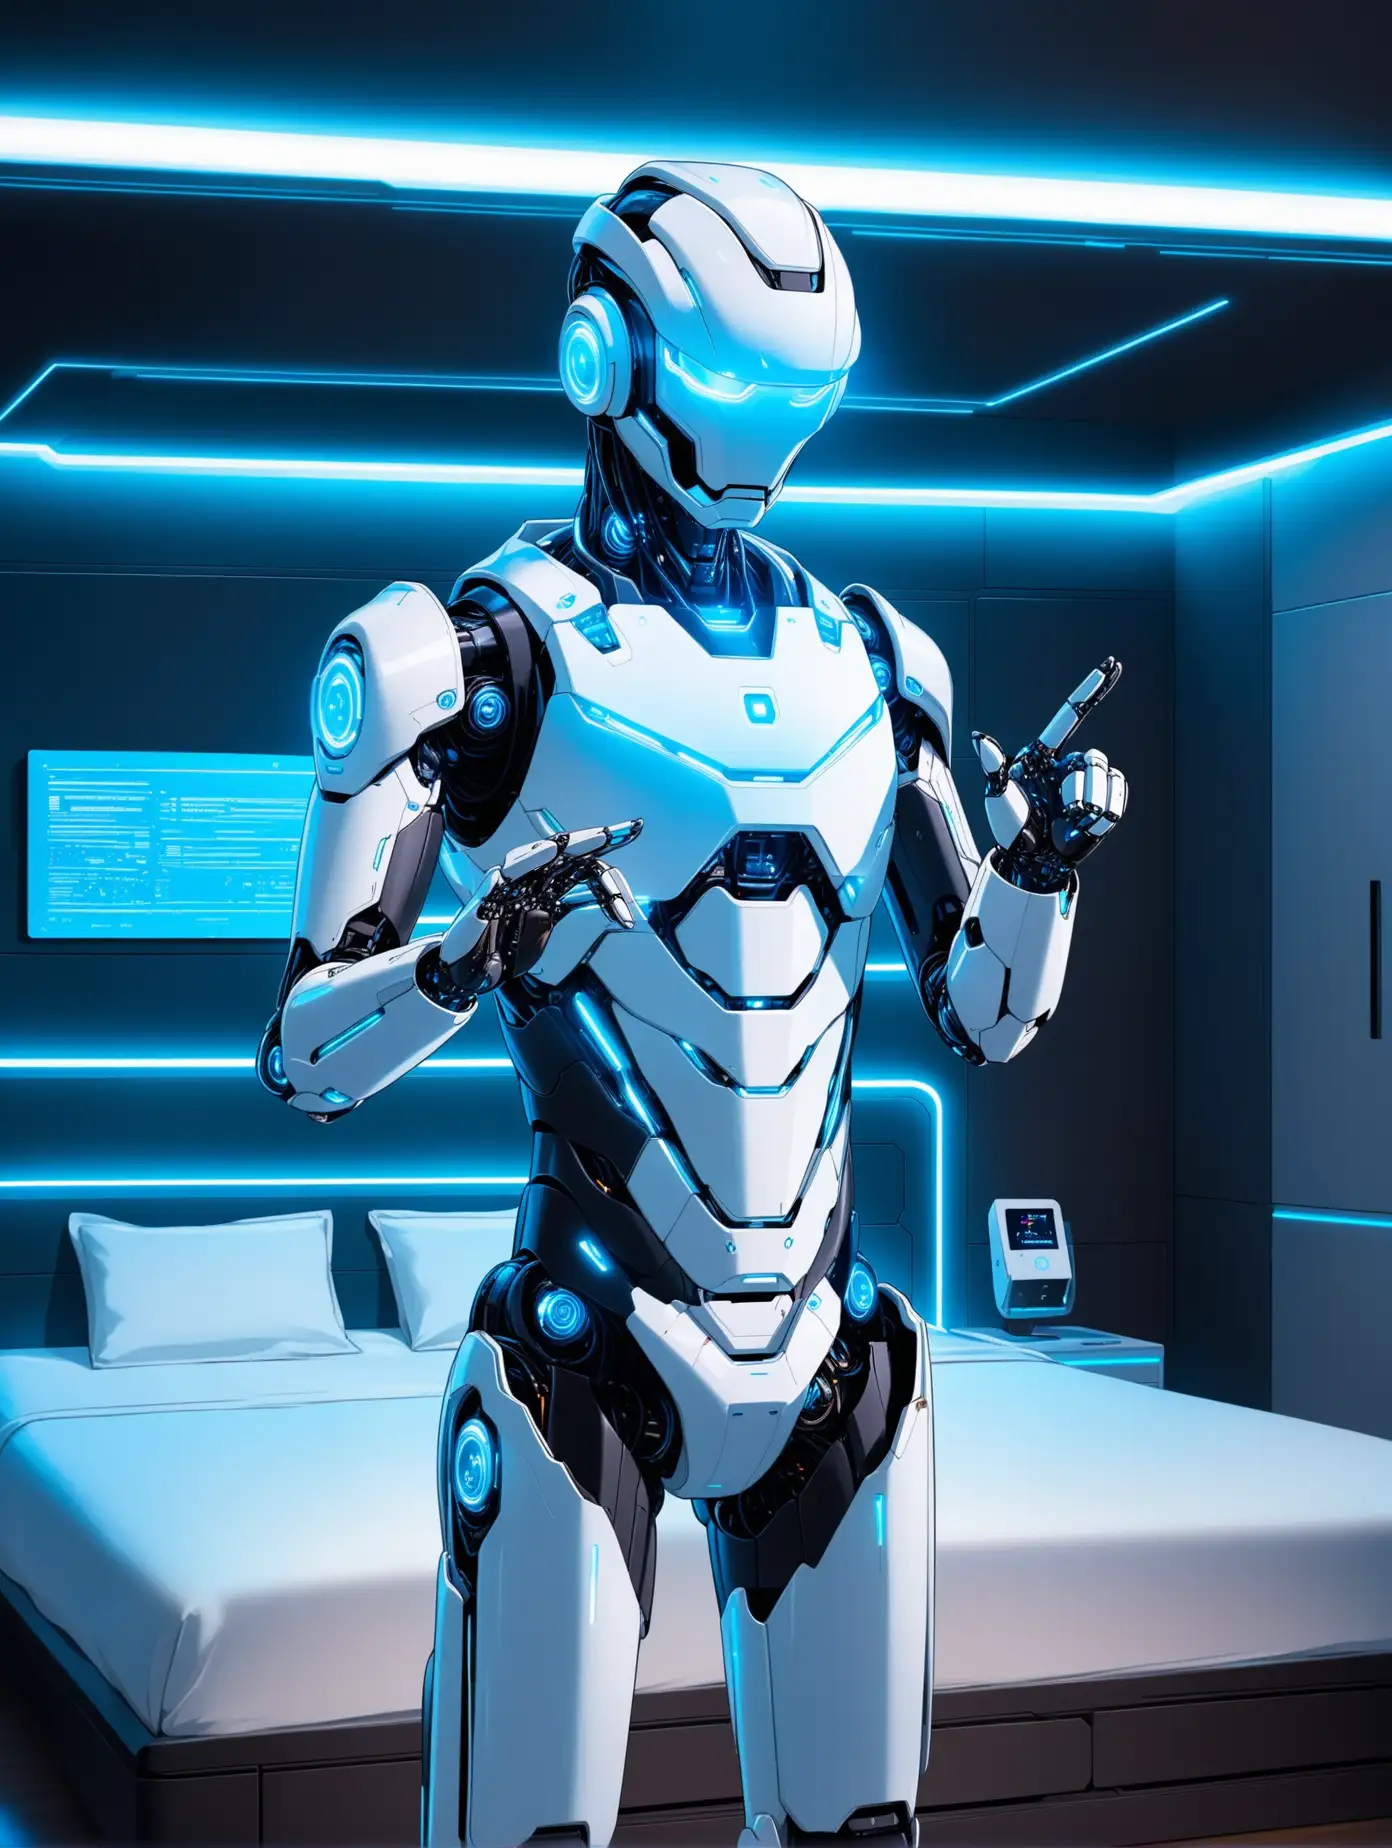 AI robot in his bedroom, He's showing off his built in functions 
His bedroom has cool futuristic, high tech aesthetic, and blue LED lights 
He's looking to the side facing the camera 
he's gesturig  like he's explaining something 